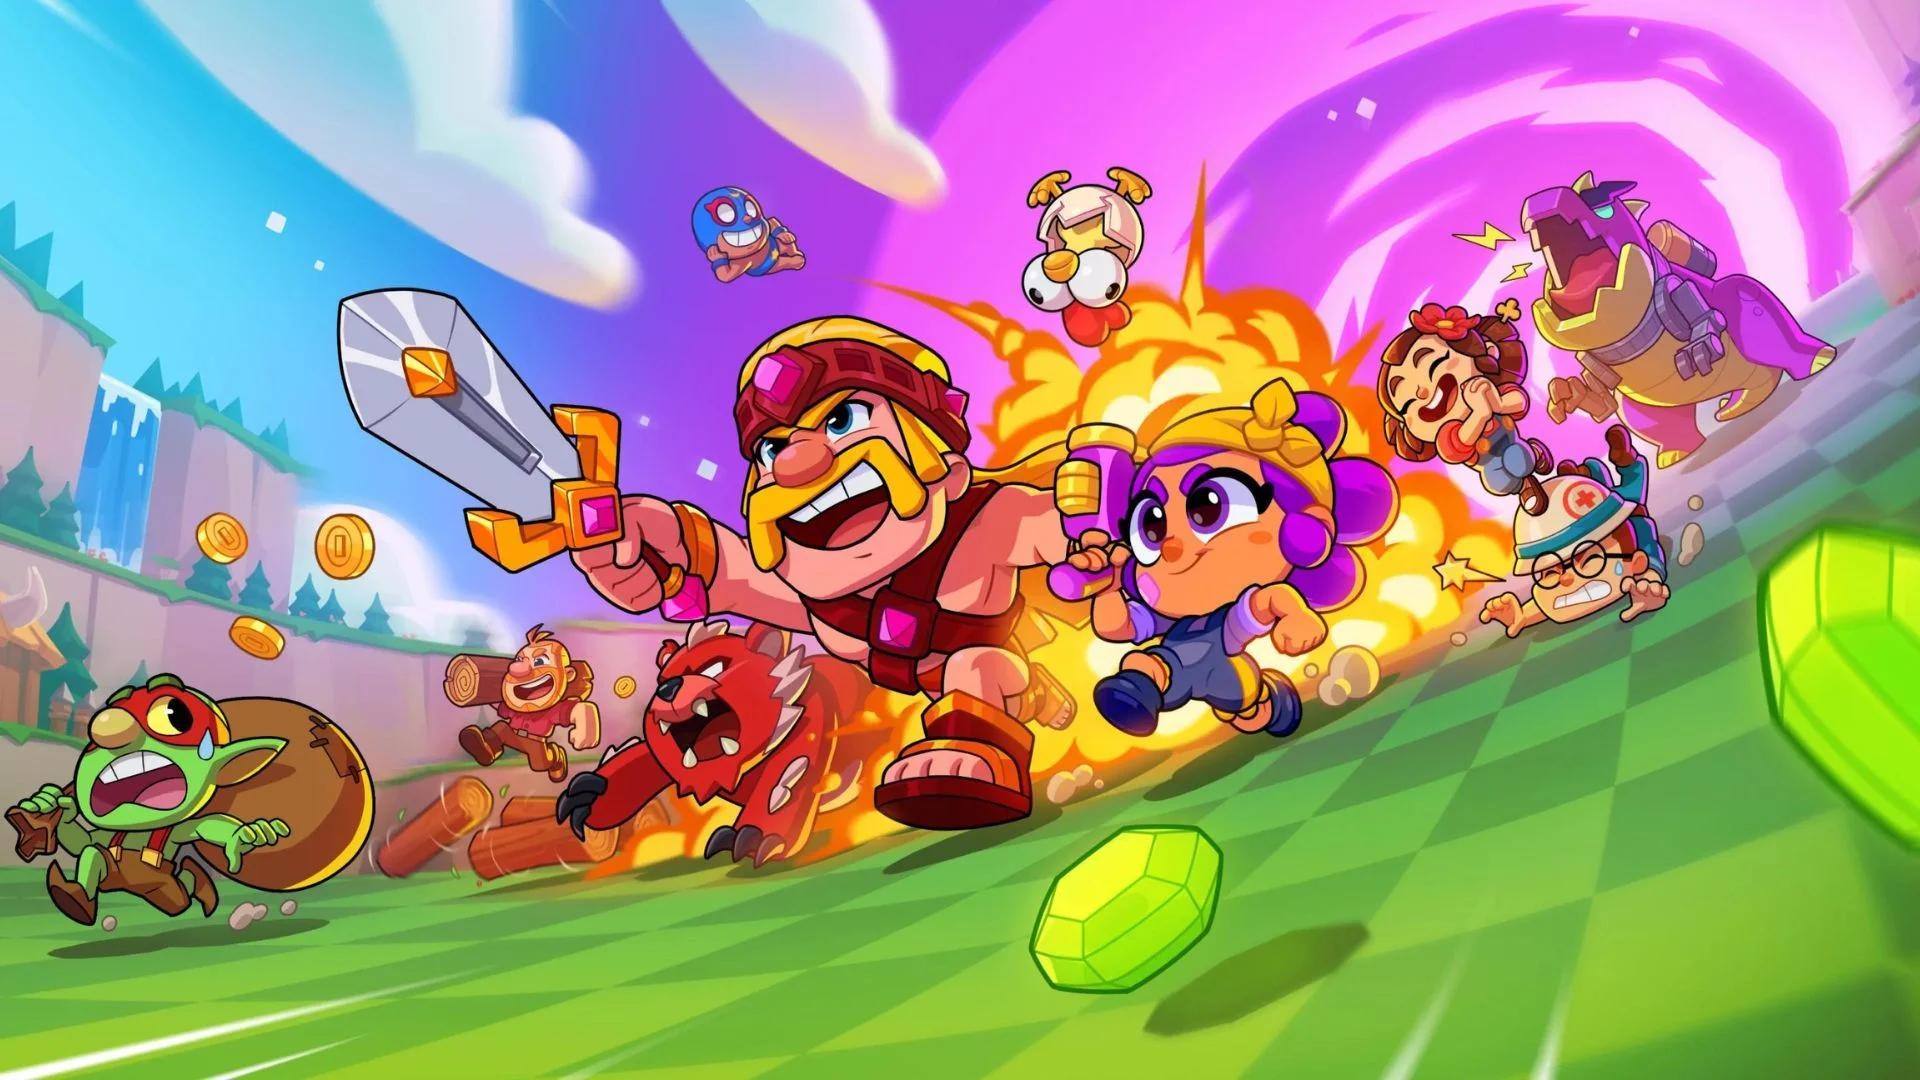 The creators of Brawl Stars and Clash Royale are releasing a new game for Android and iOS